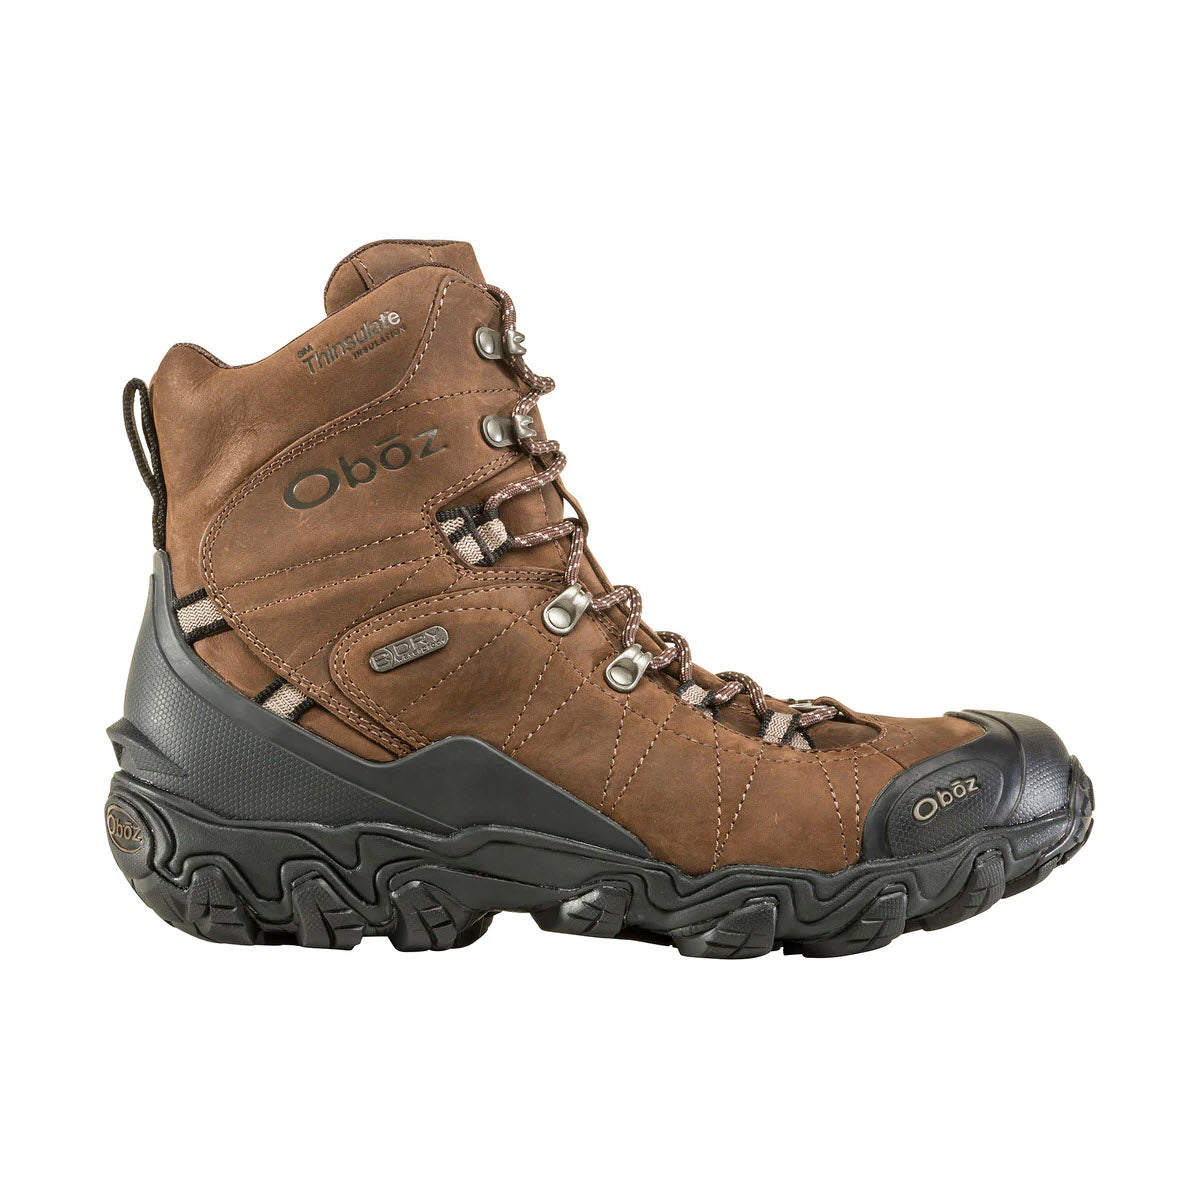 A single Oboz BRIDGER 8" INSULATED B-DRY BARK hiking boot featuring a high-top design, brown leather upper, and a sturdy black winterized rubber outsole, shown against a white background.